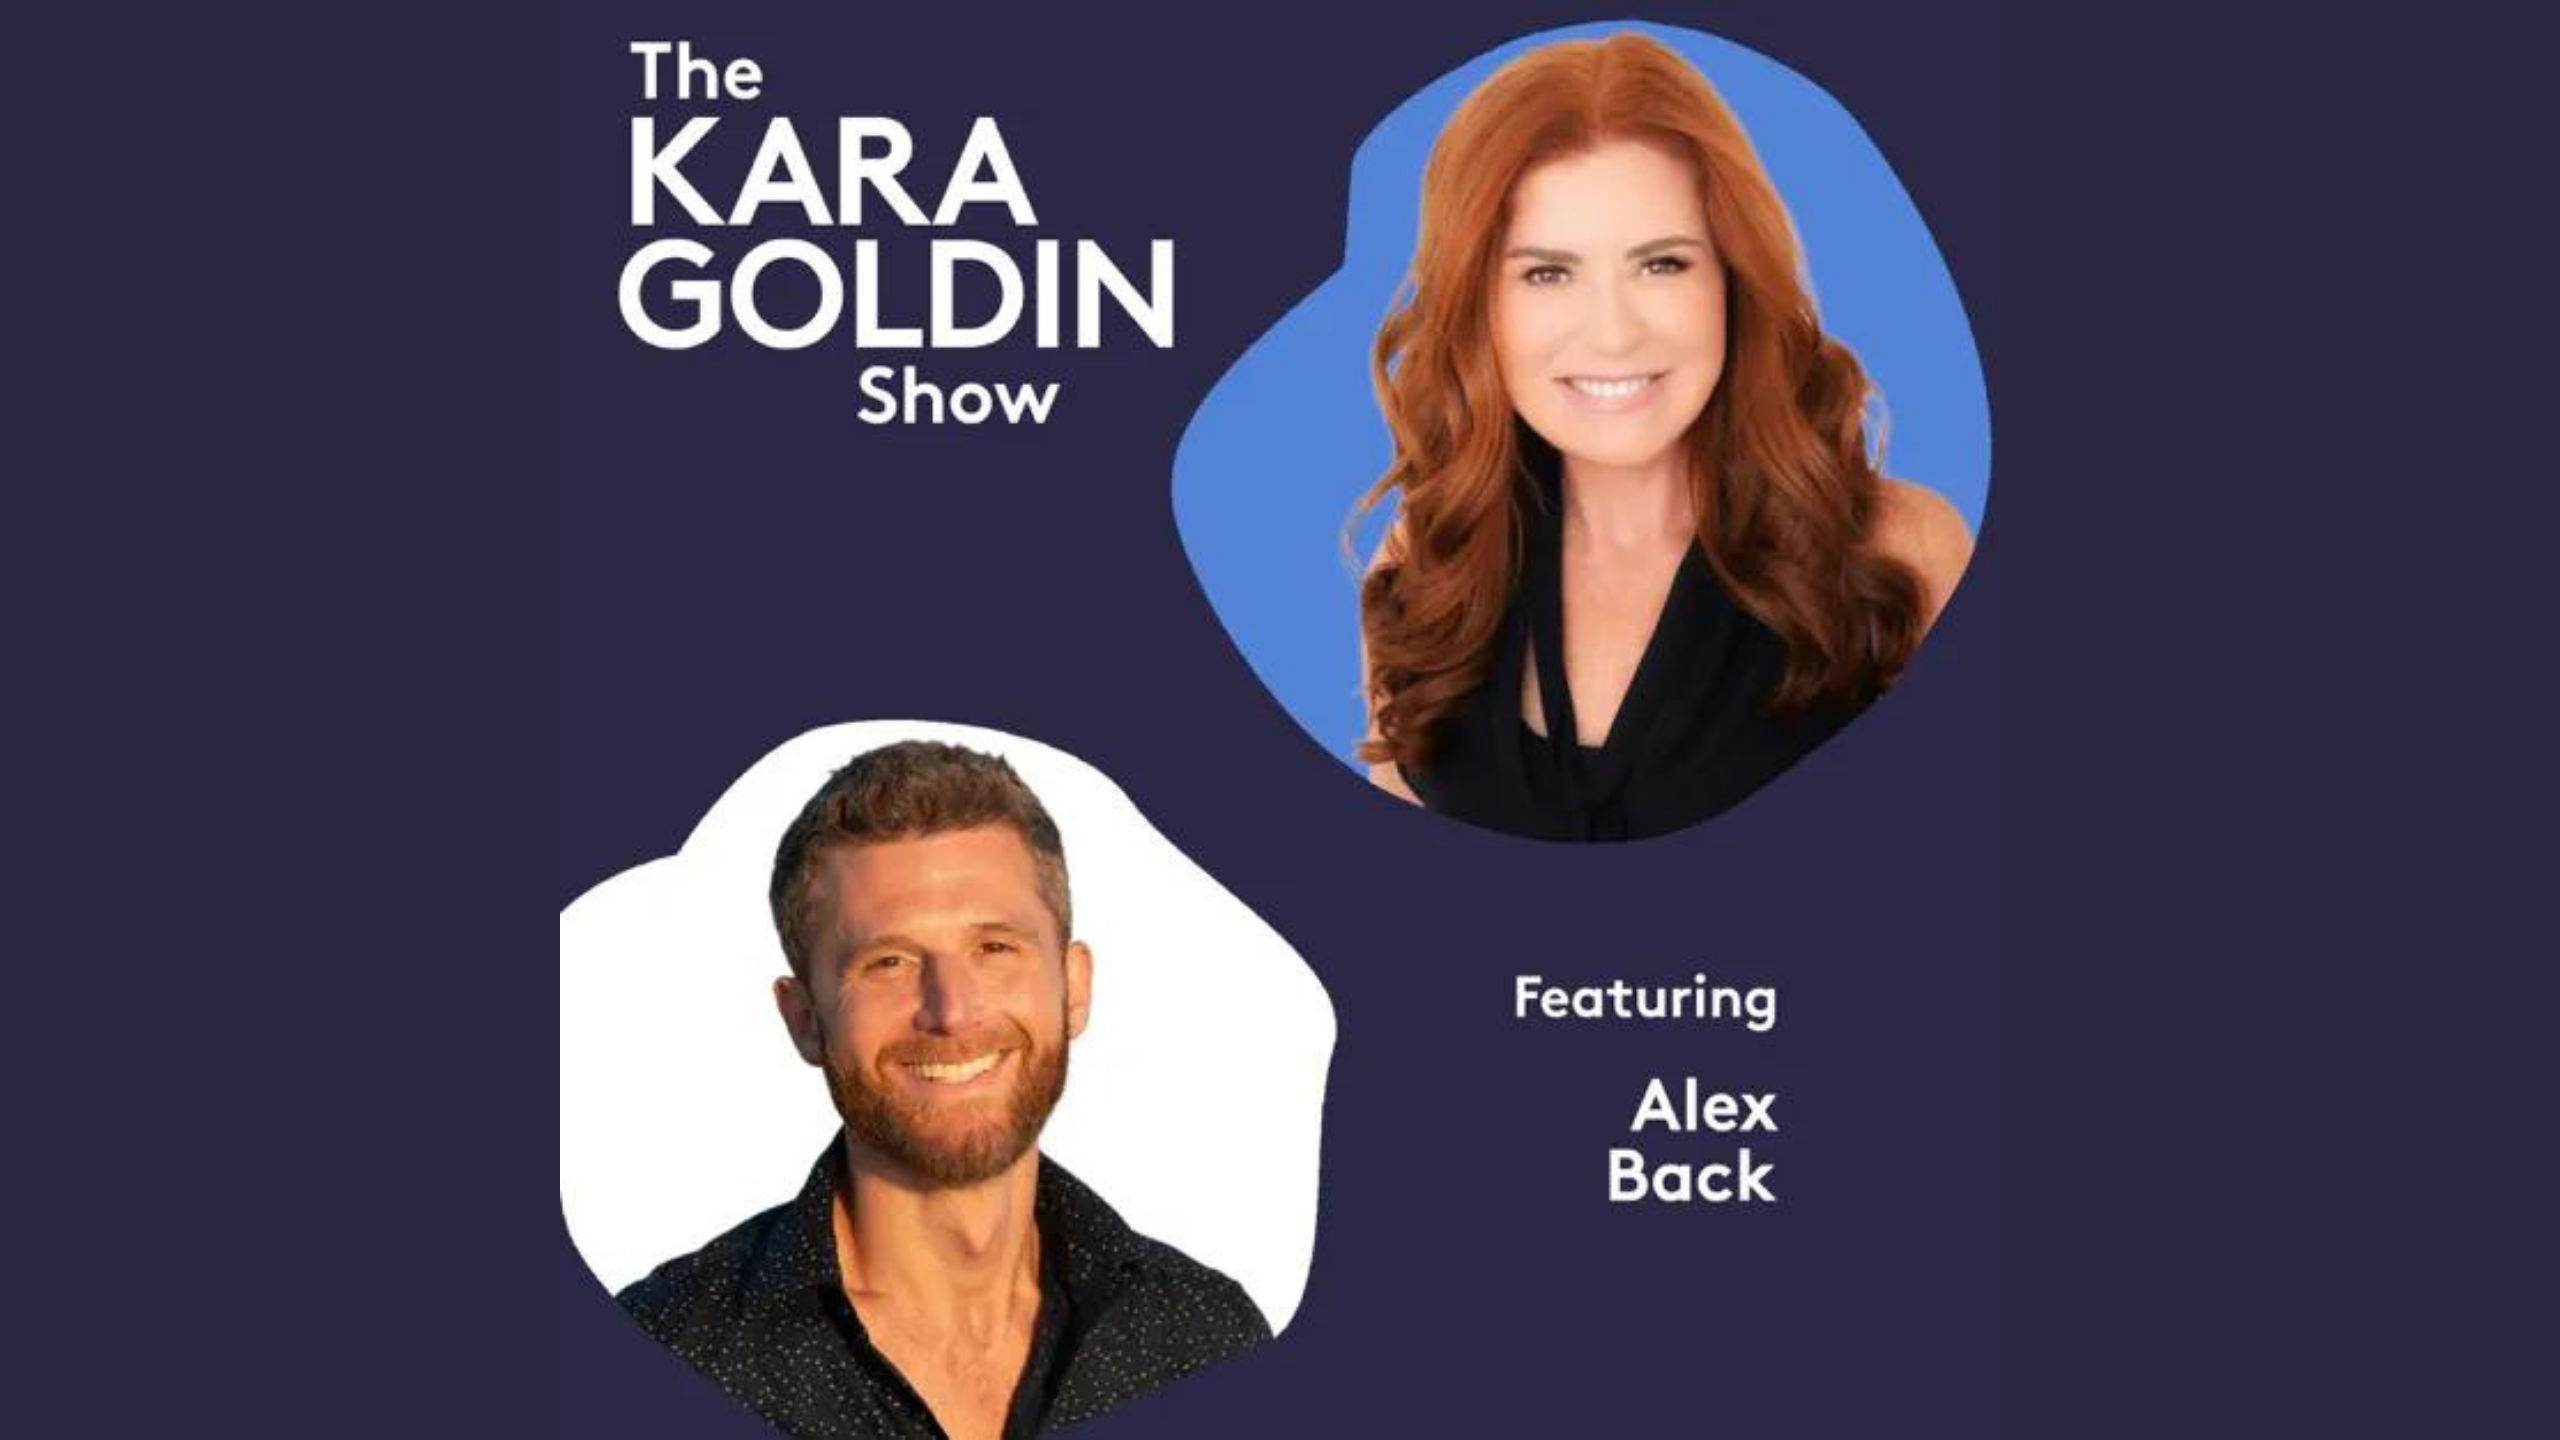 A promotional image for 'The Kara Goldin Show' featuring a photo of the host, a woman with long red hair, and a guest, Alex Back, a man with short brown hair and a beard. The background is dark with white and light blue text.